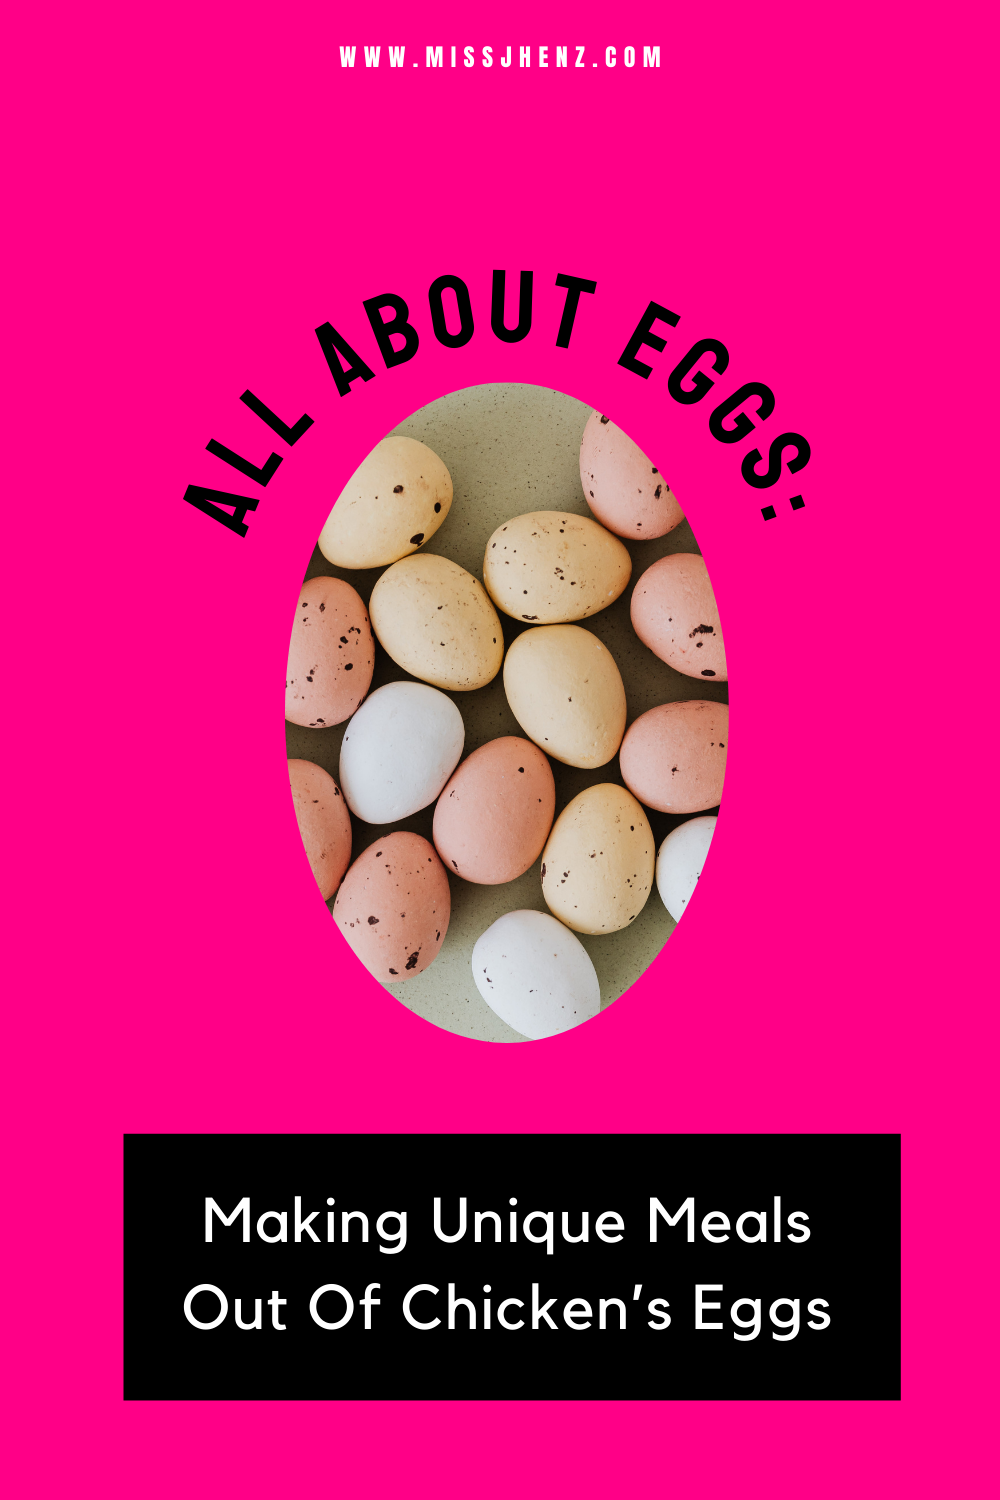 All About Eggs: Making Unique Meals Out Of Chicken’s Eggs